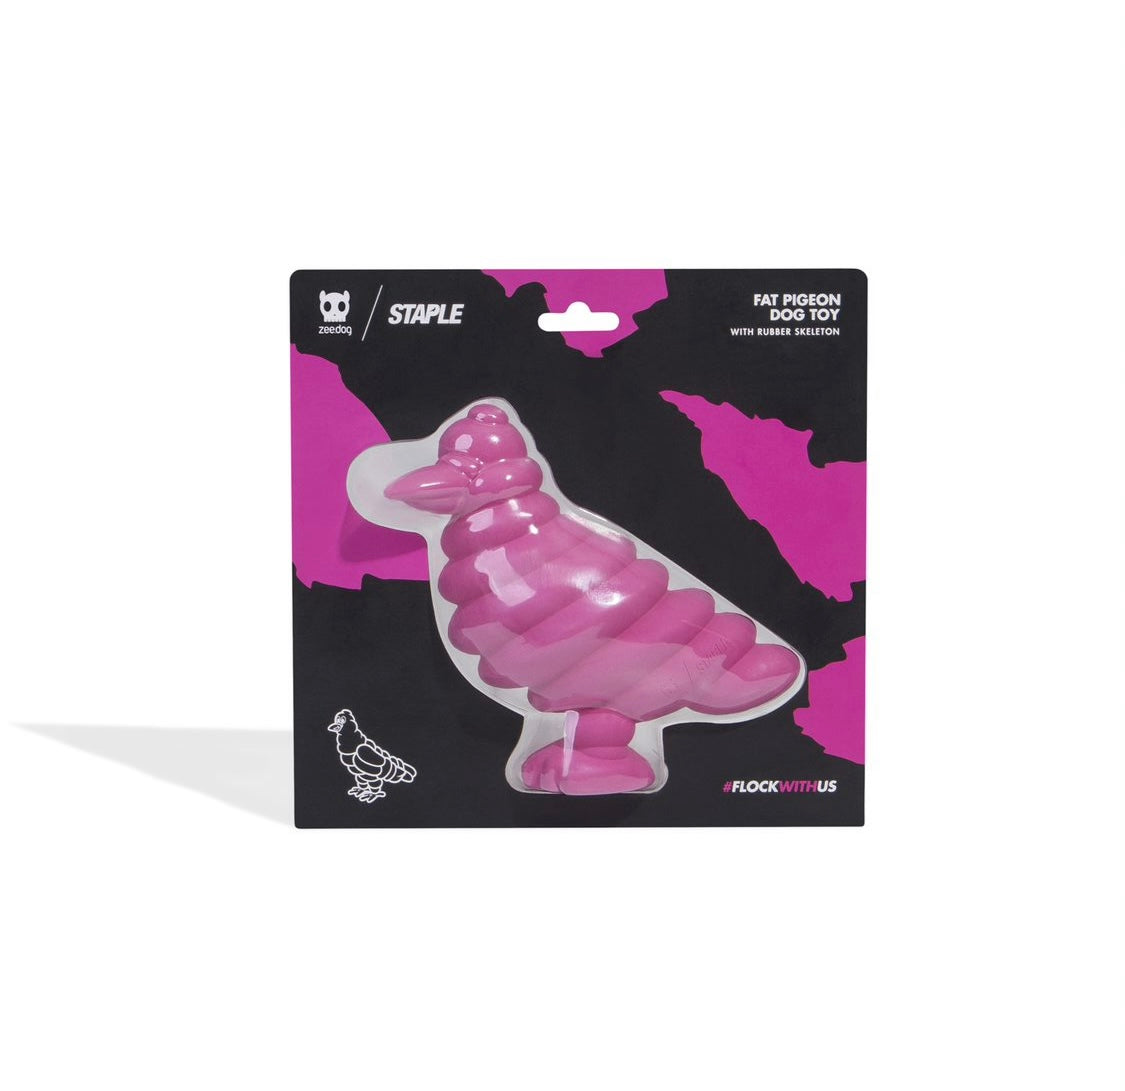 [30%OFF] Staple x Zee.Dog Rubber Pigeon Toy